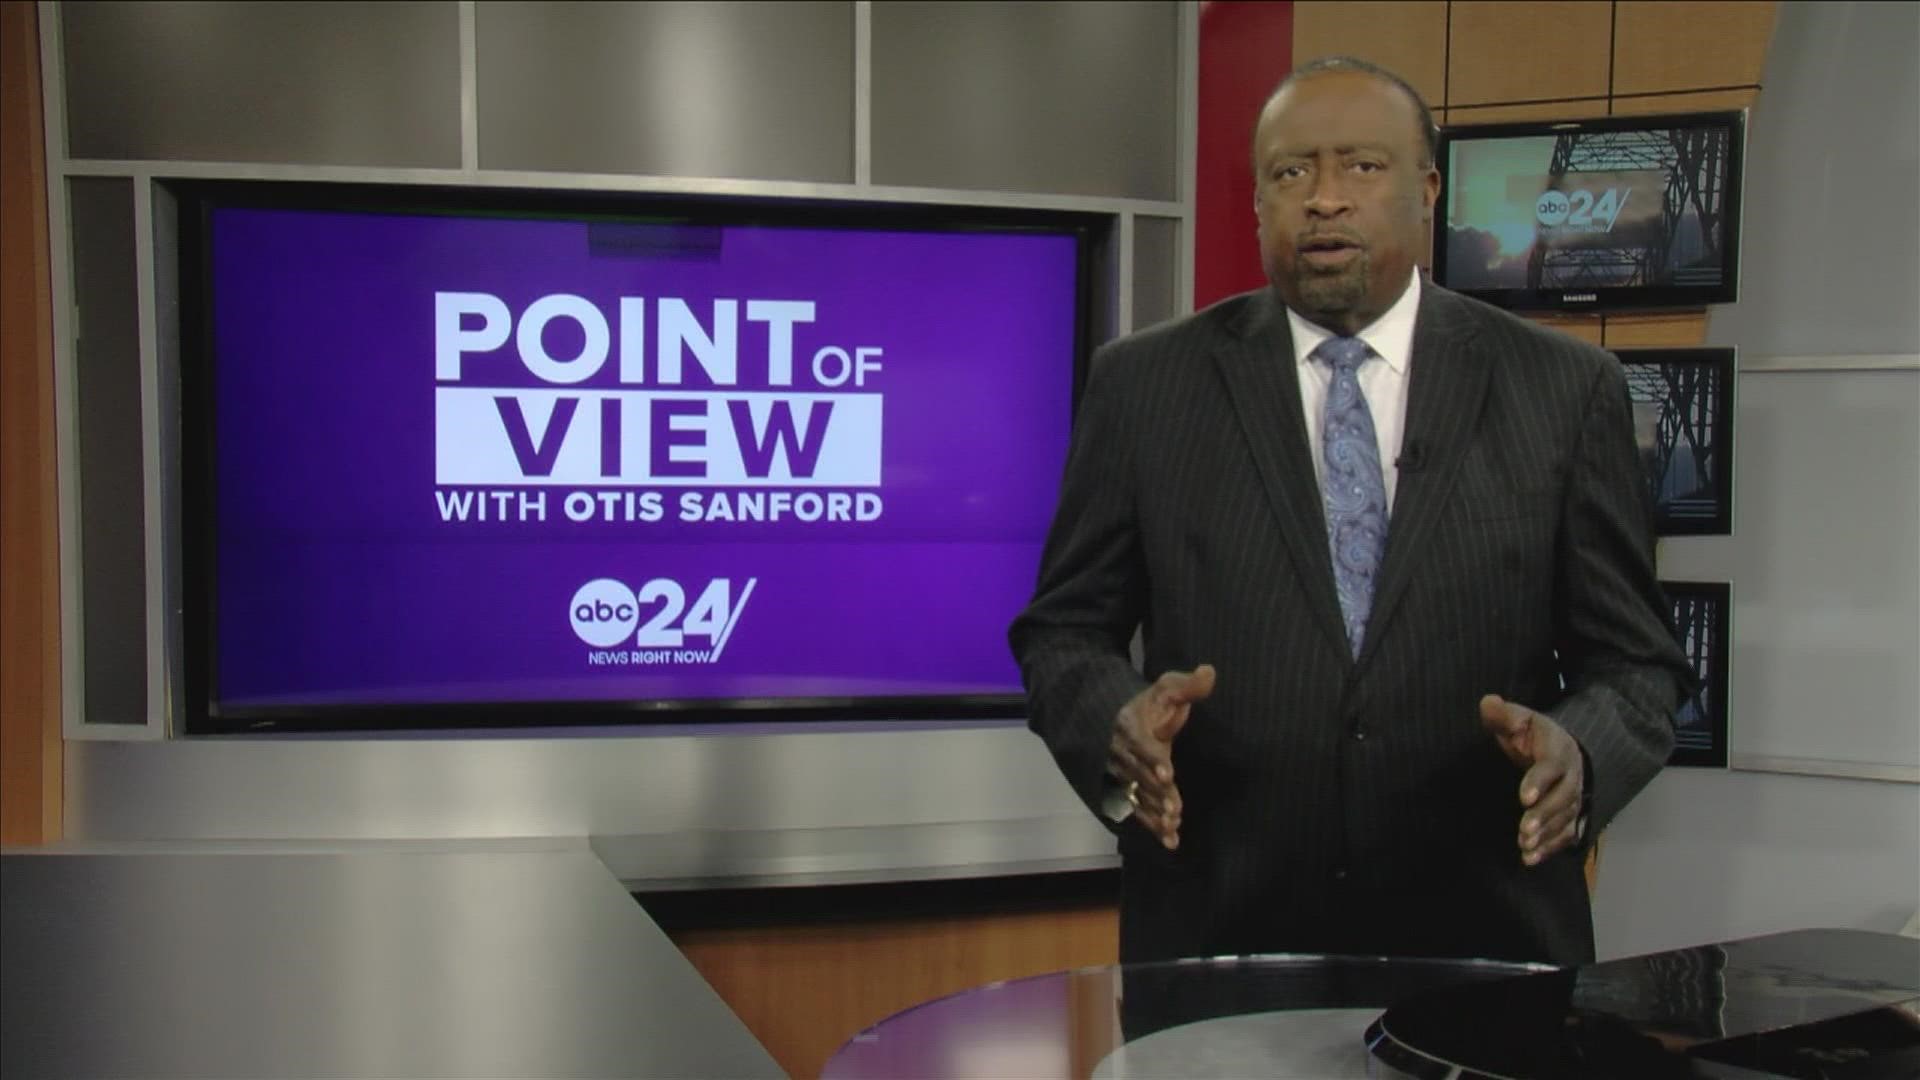 ABC24 political analyst and commentator Otis Sanford shared his point of view on the latest since the mass shooting in Buffalo.